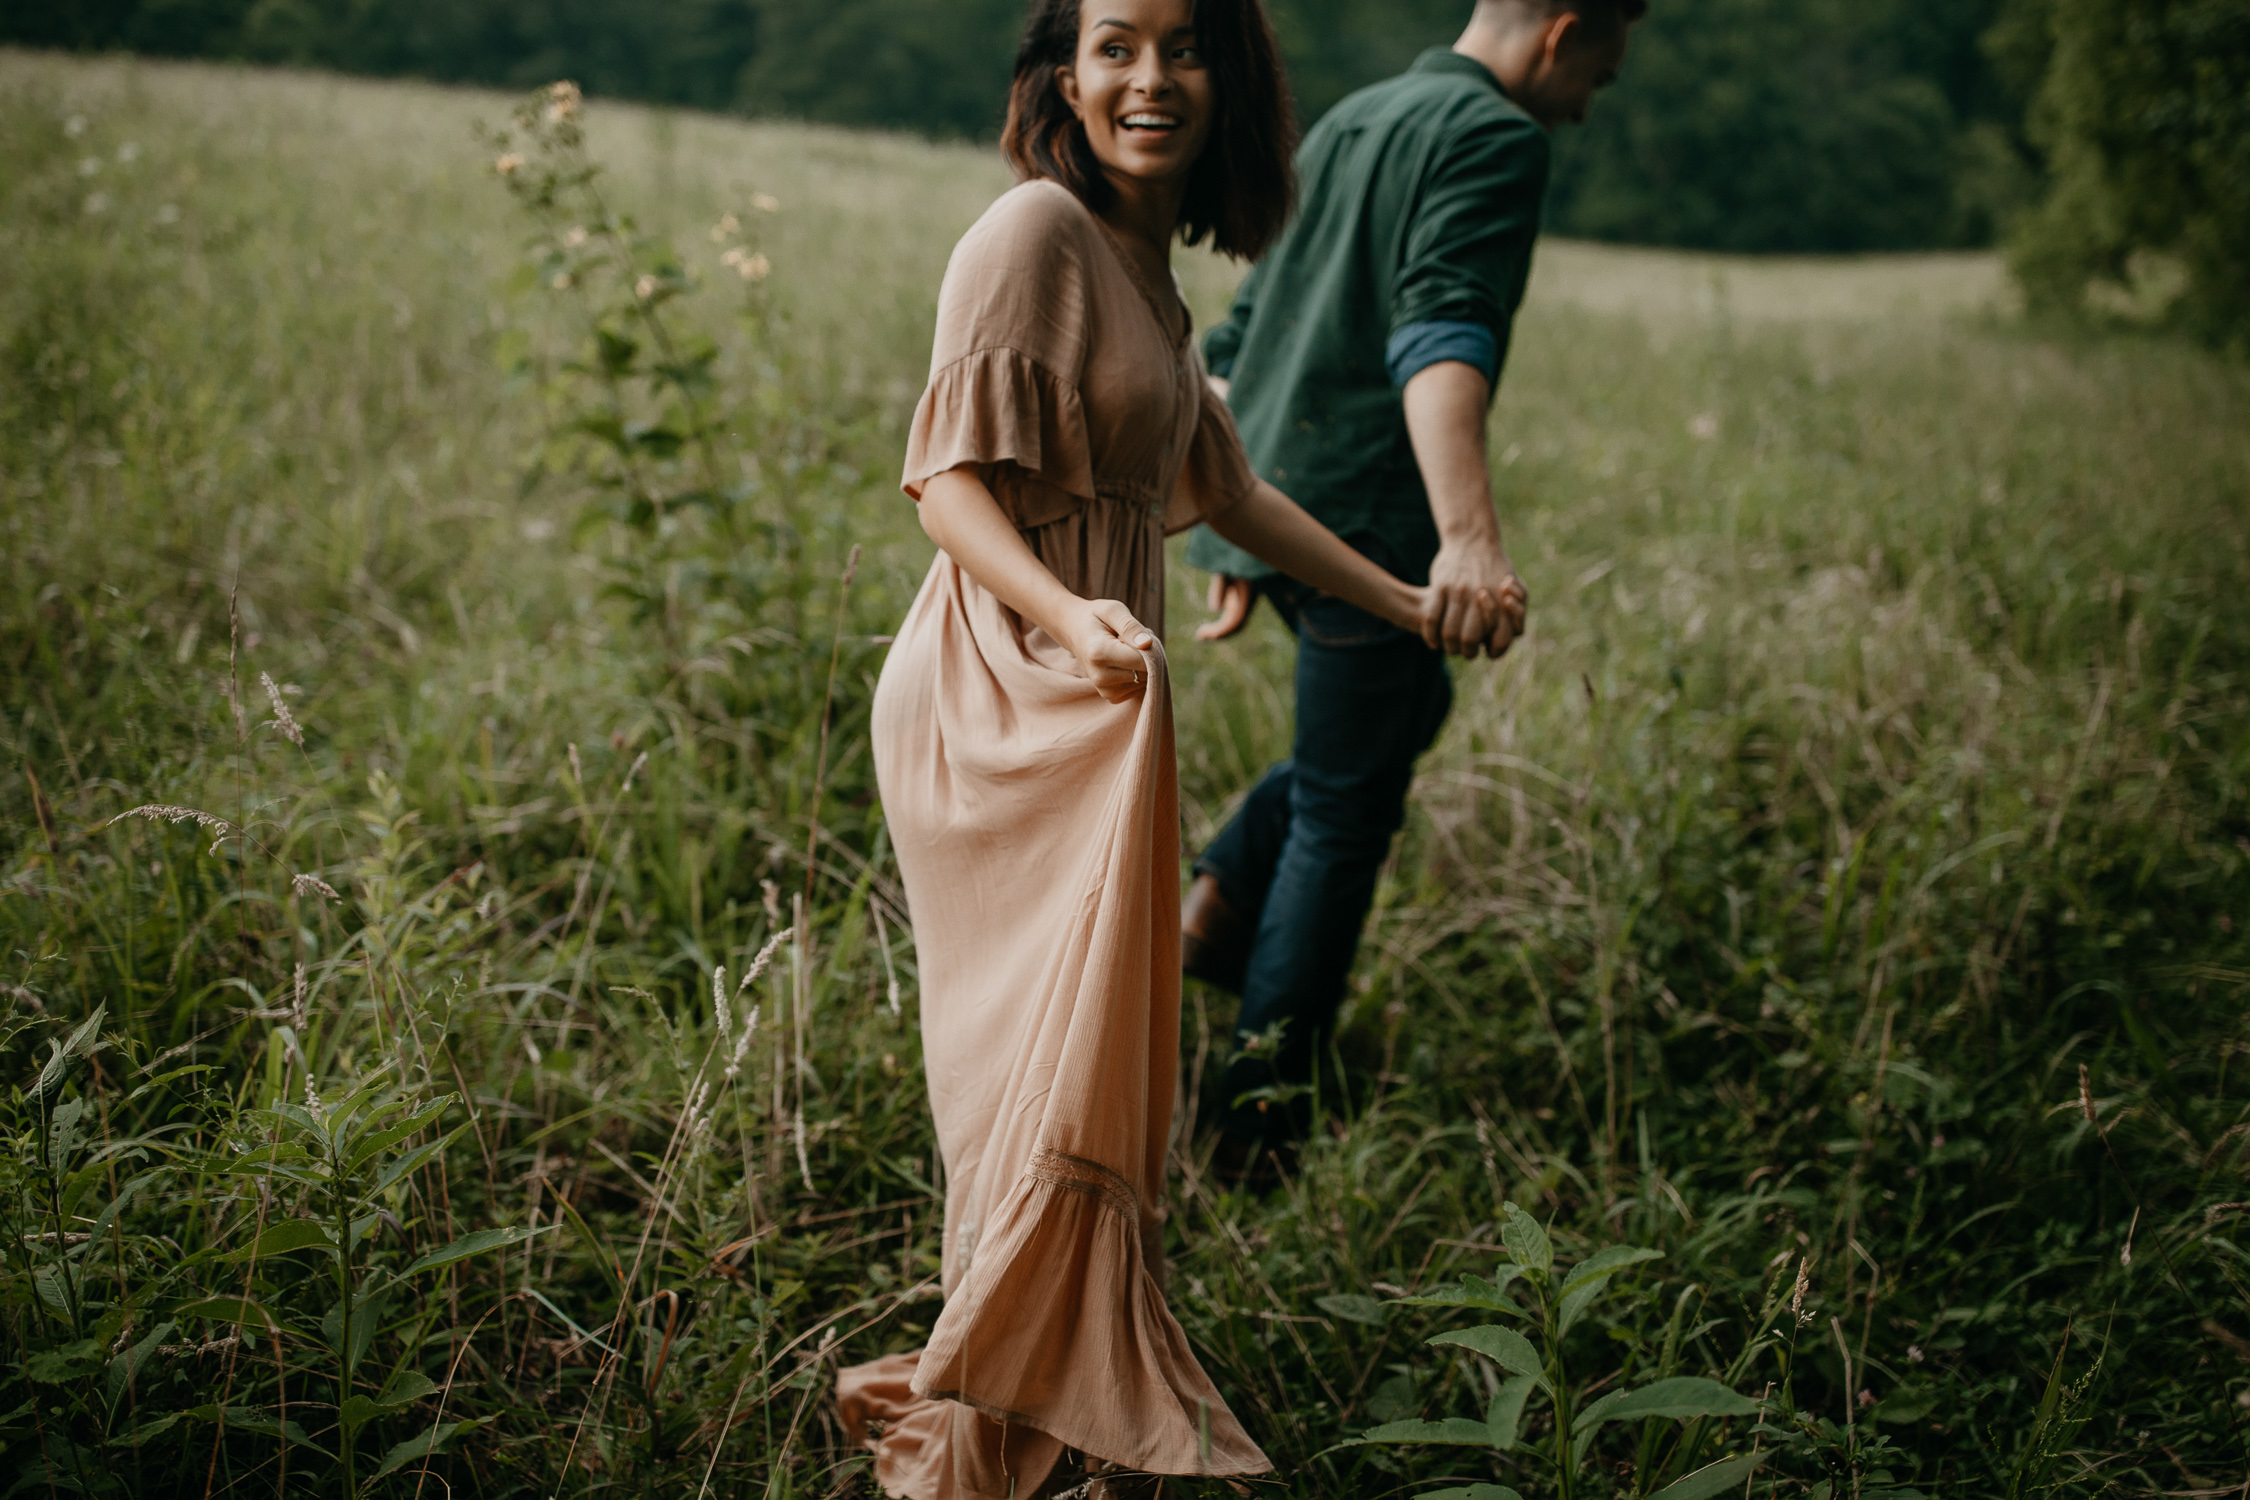 ariannamtorres and isaac engagement session at cades cove smoky mountains elopement-48.jpg